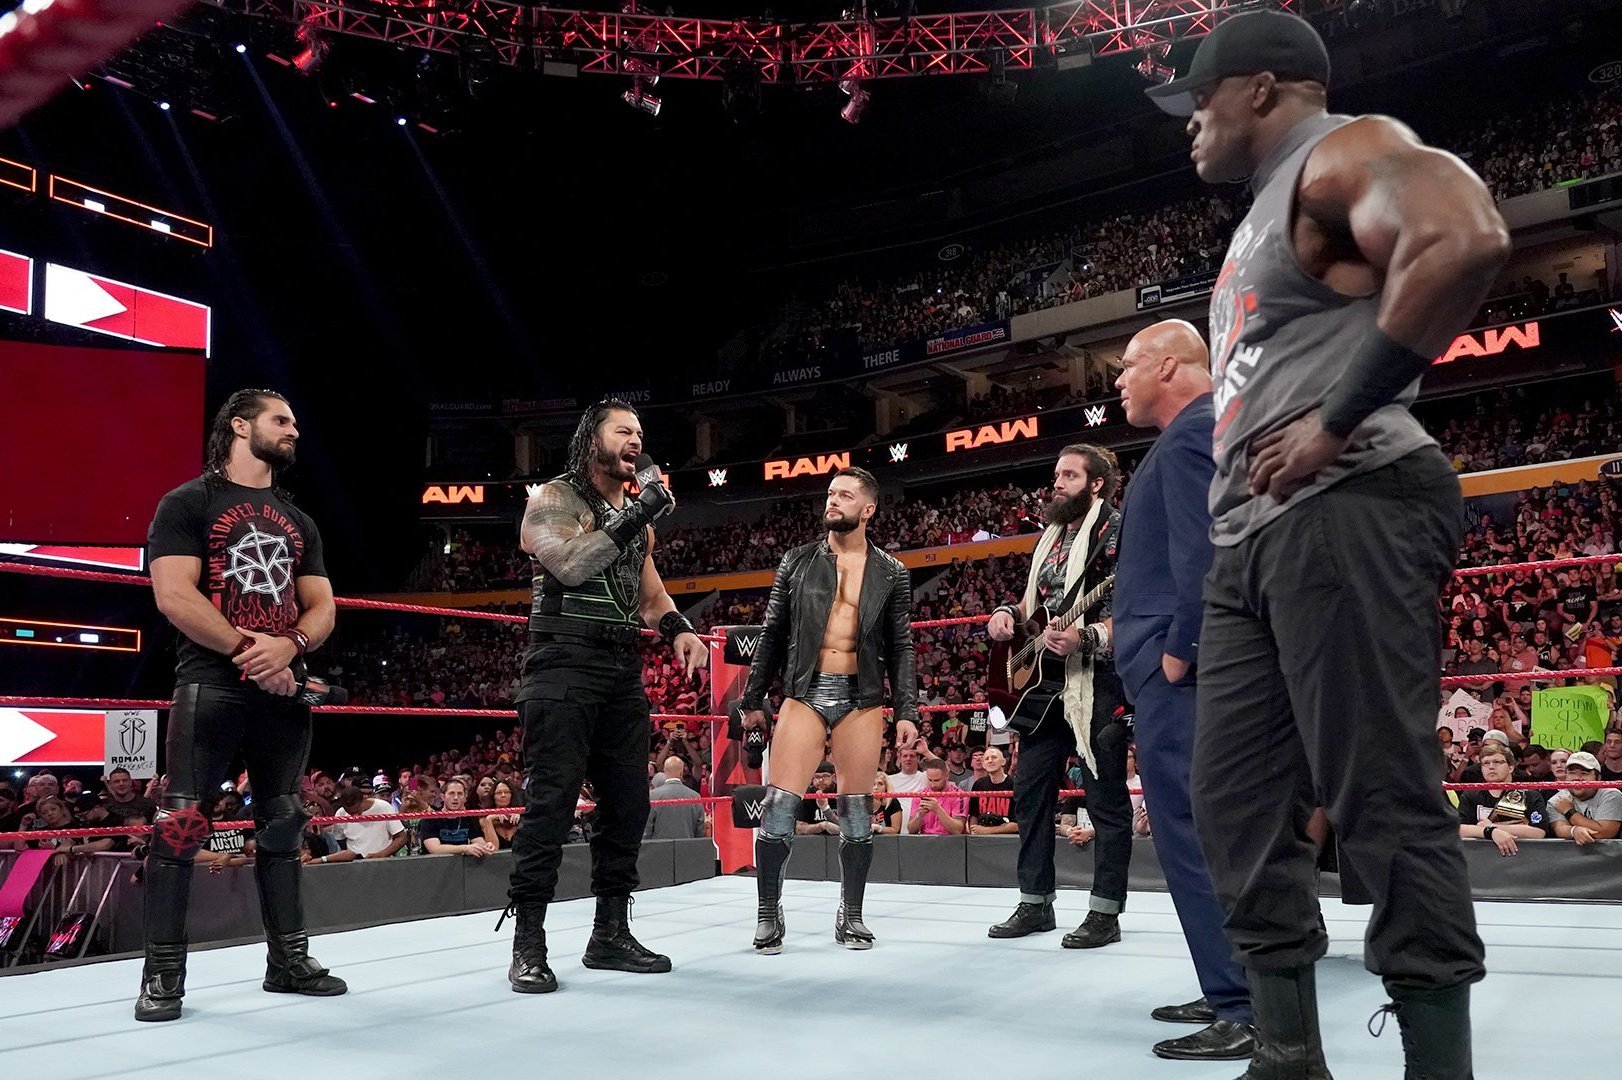 Wwe Raw Results Winners Grades Reaction And Highlights From July 16 Bleacher Report Latest News Videos And Highlights